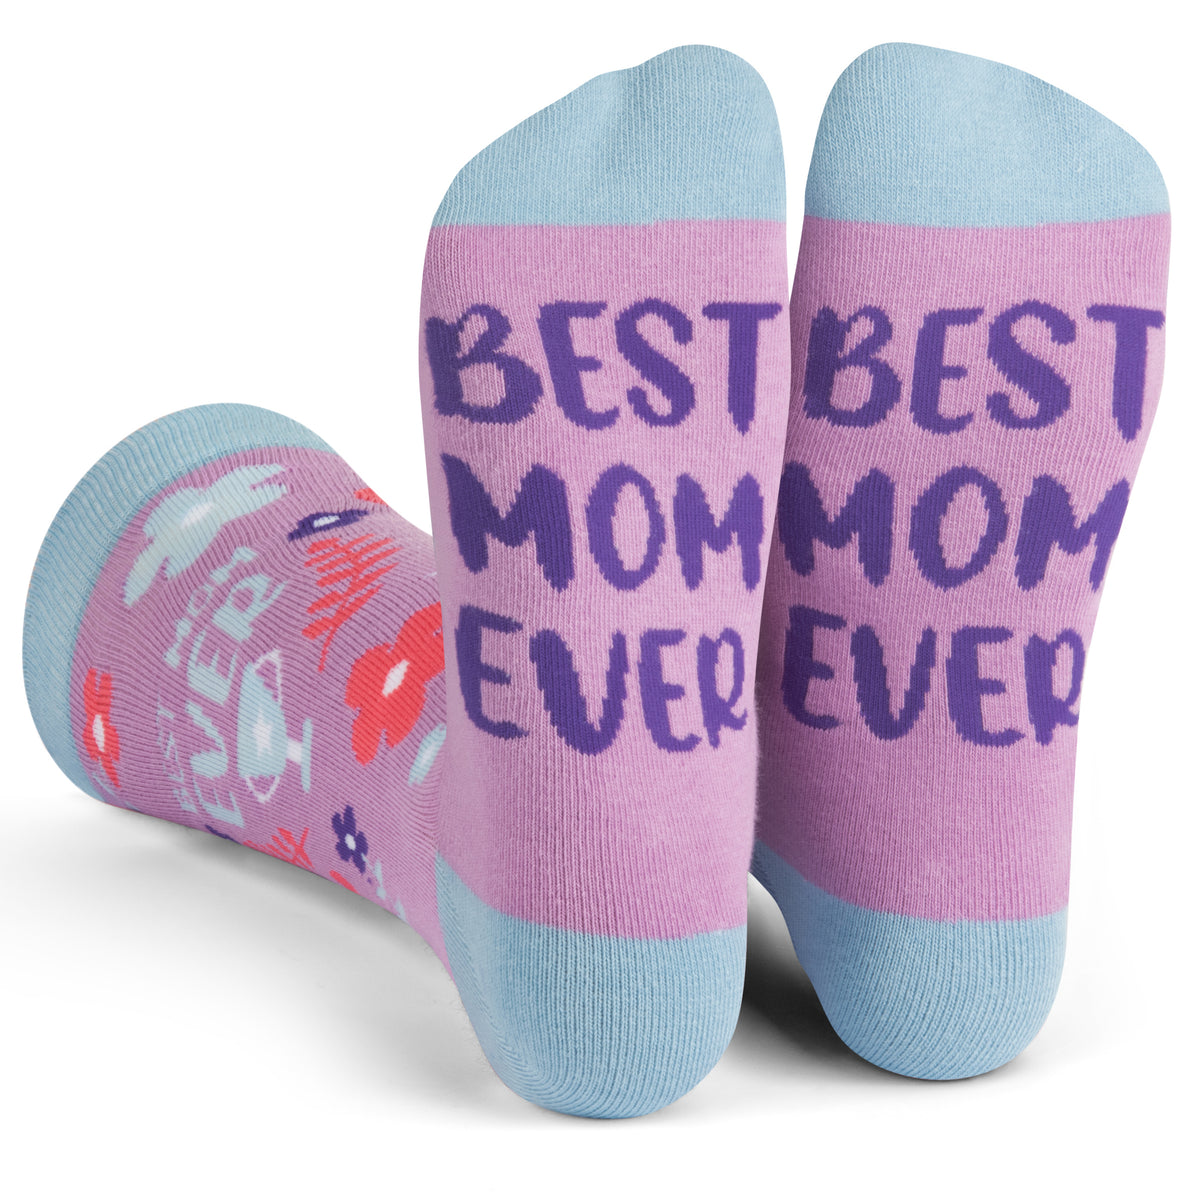 10 best places where your mom can buy you quality socks and